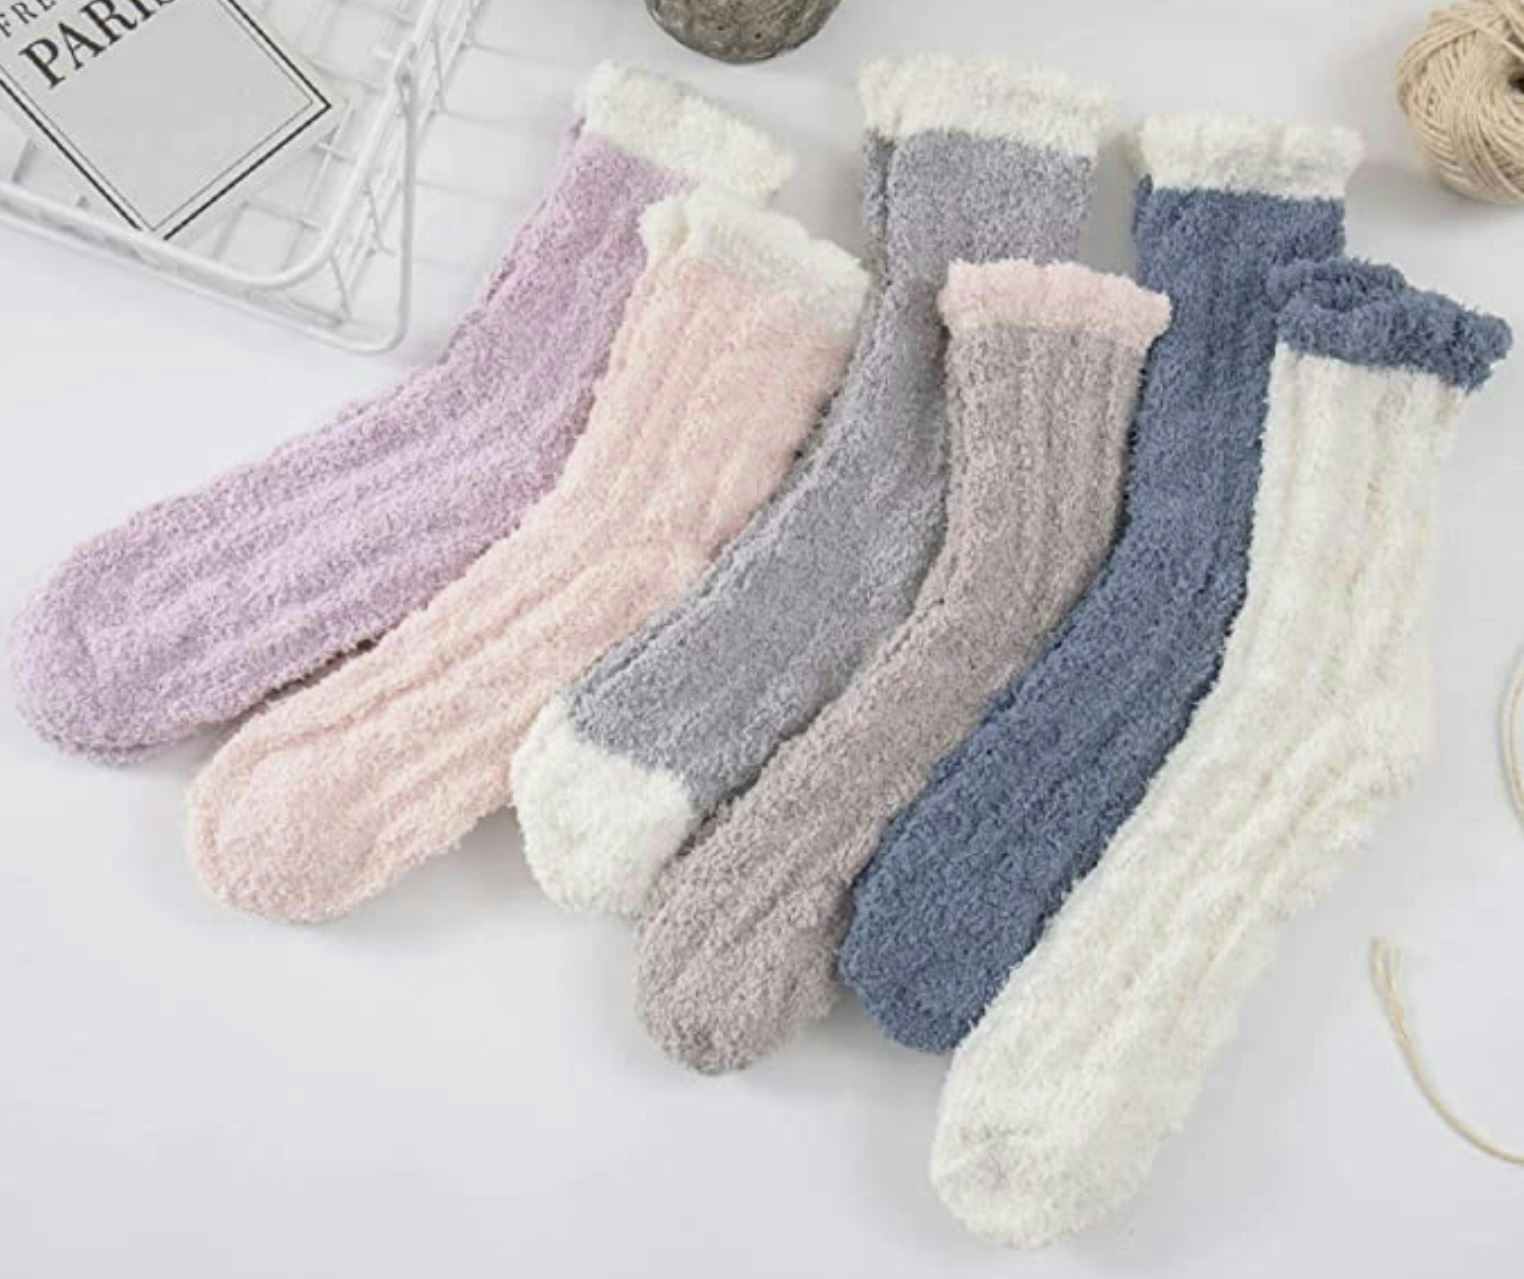 A pair of six fuzzy socks on a table.